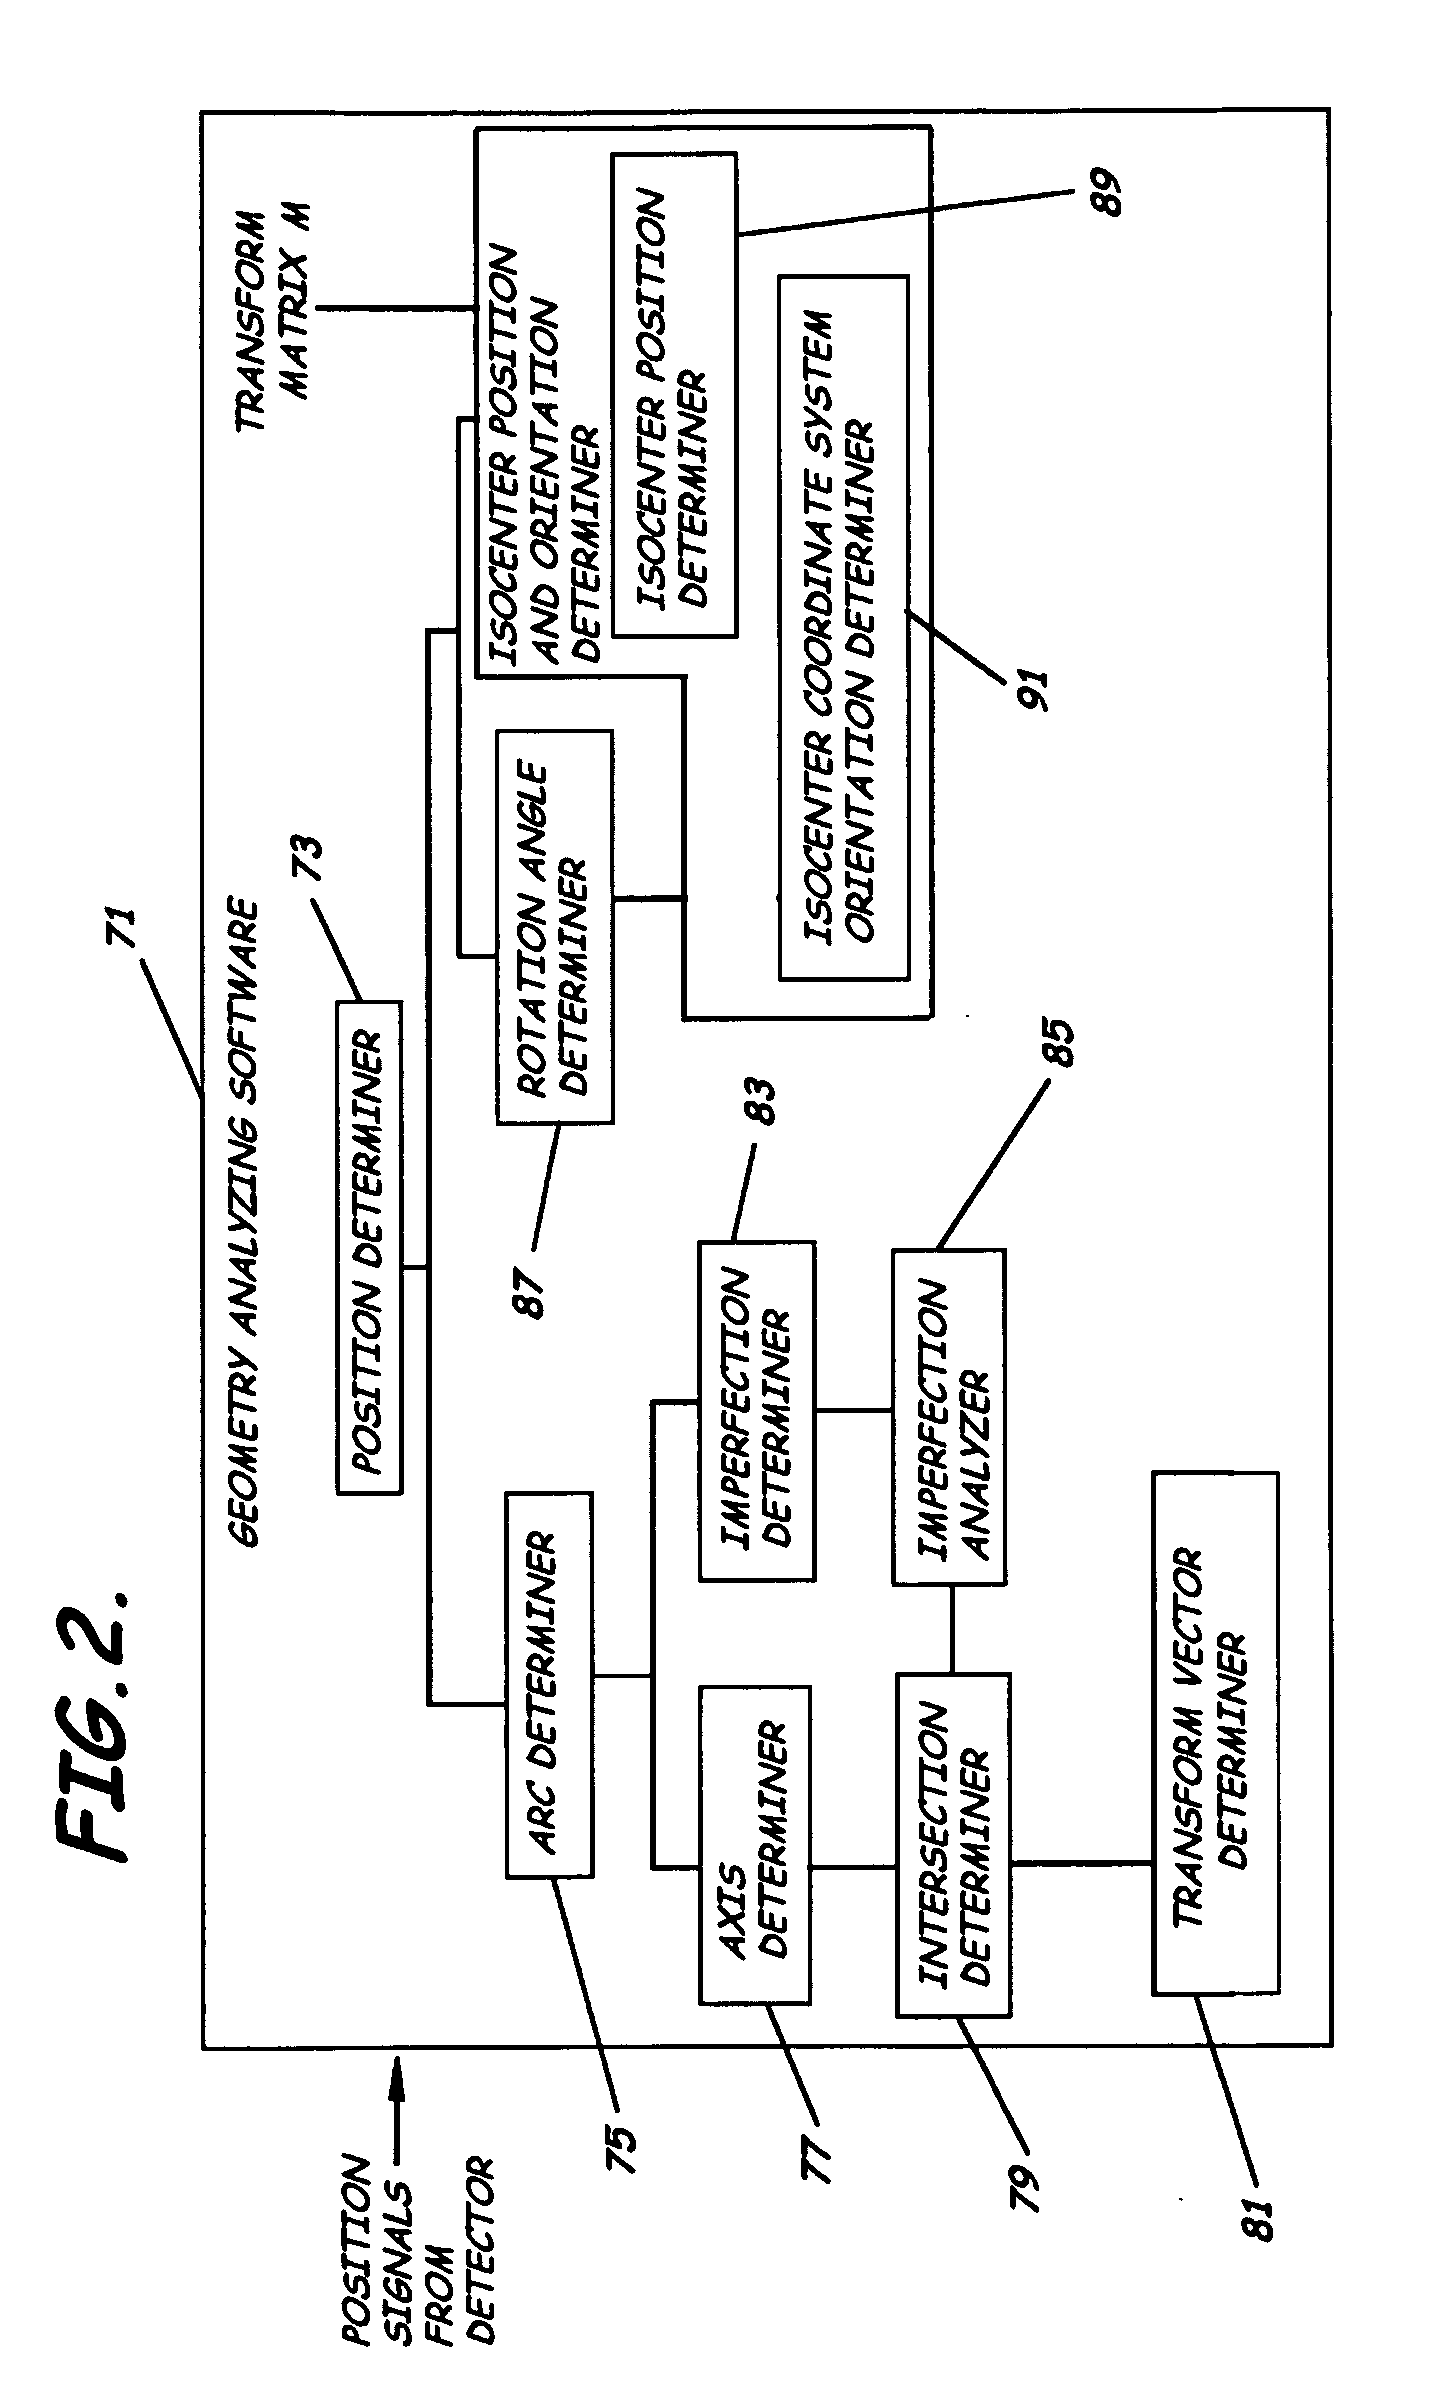 System for analyzing the geometry of a radiation treatment apparatus, software and related methods